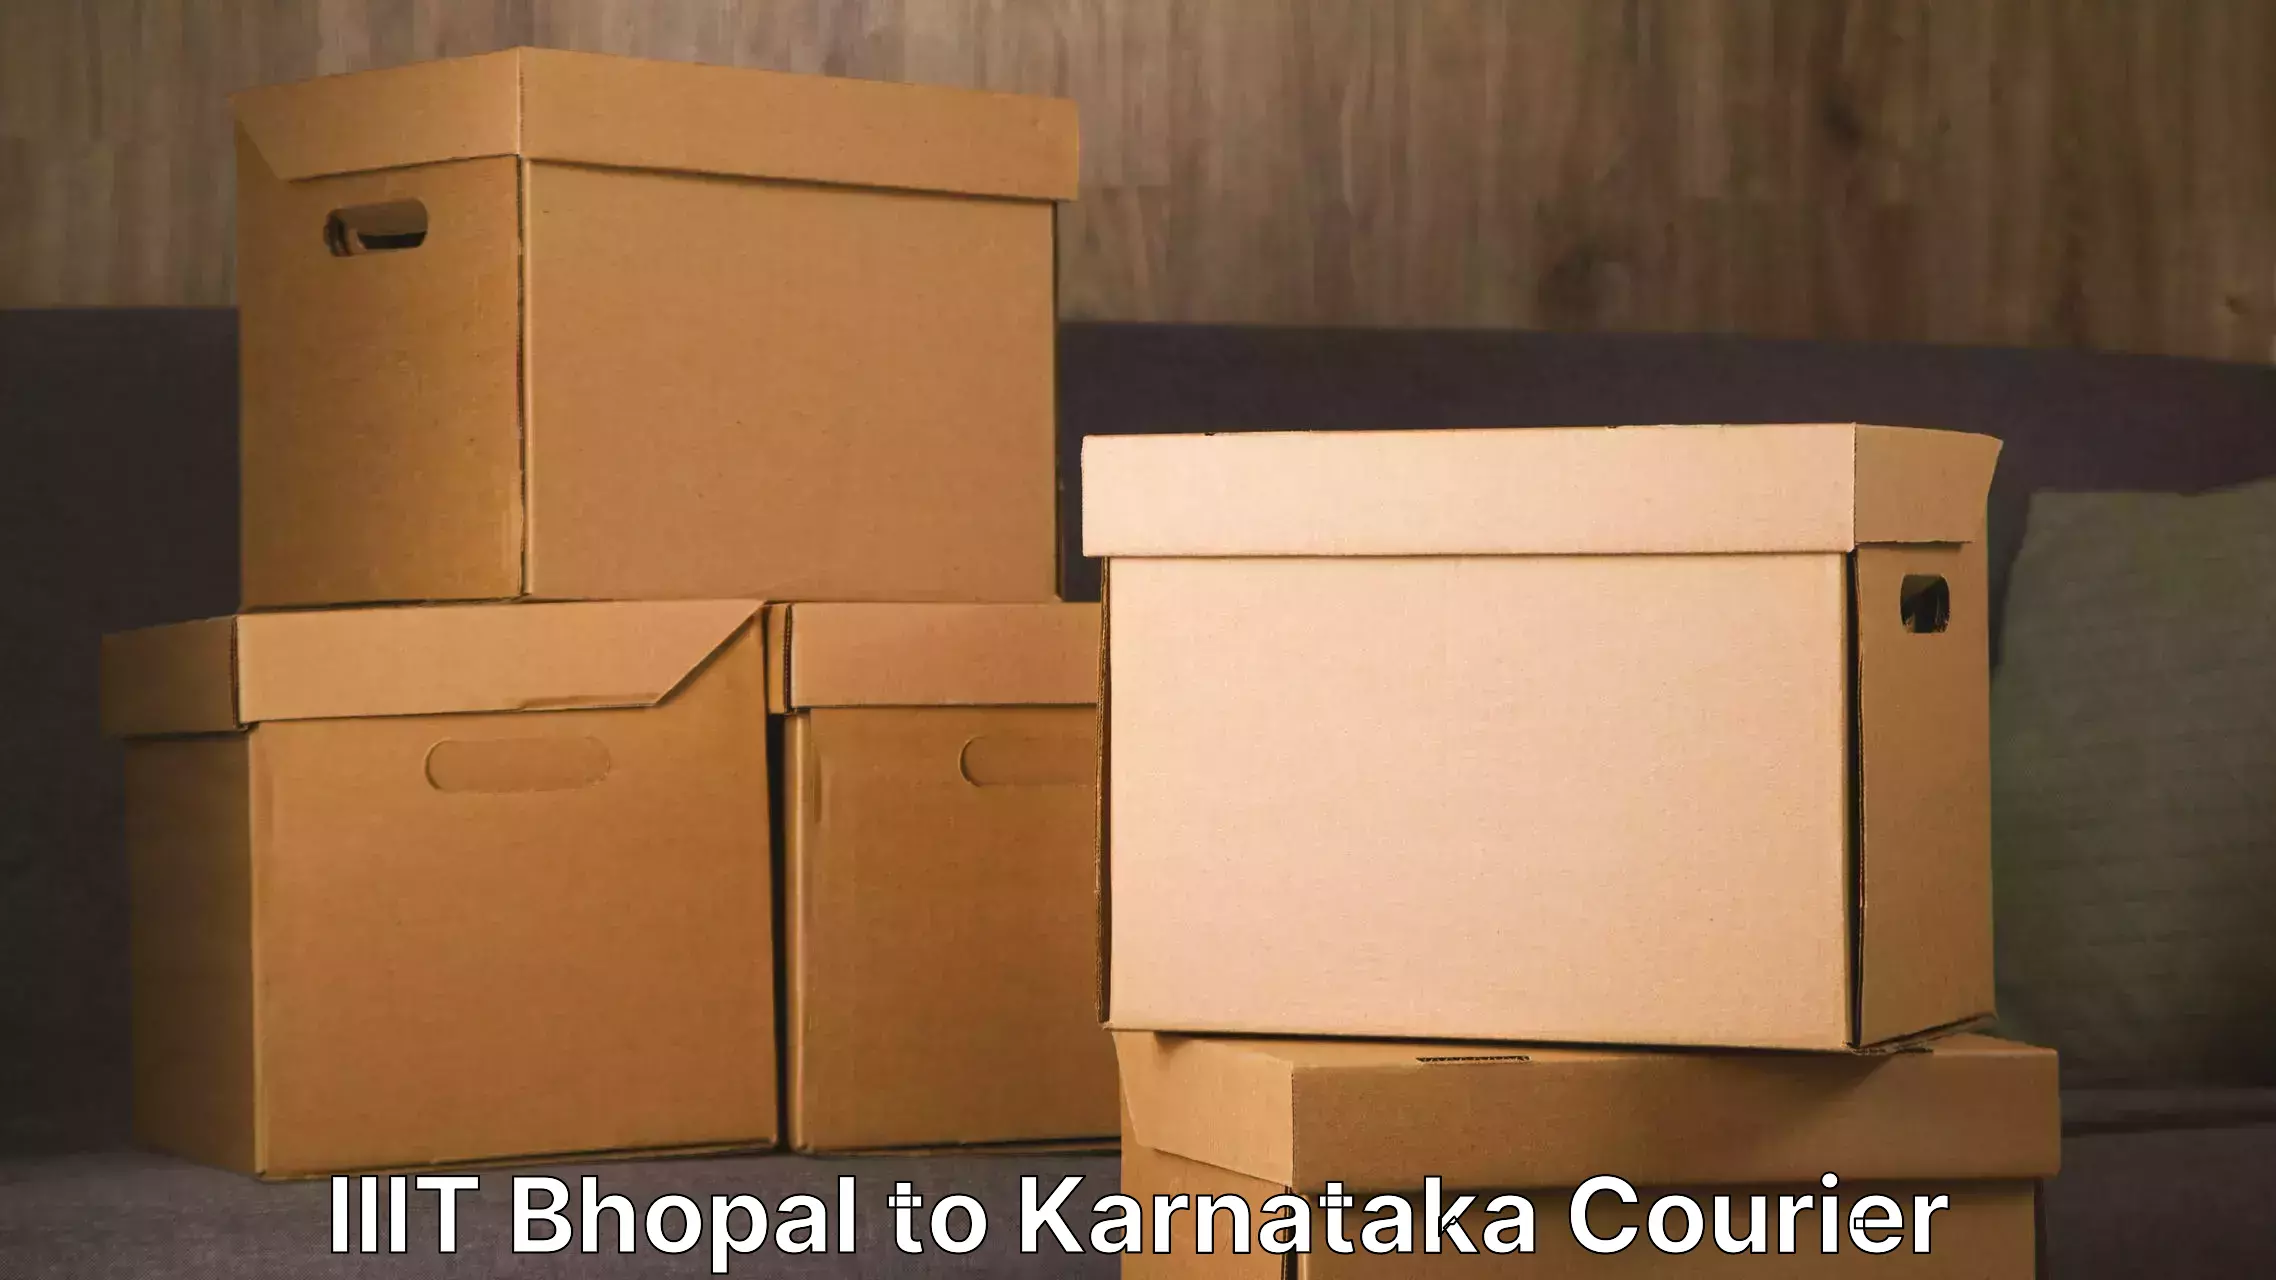 Professional moving company IIIT Bhopal to Manipal Academy of Higher Education